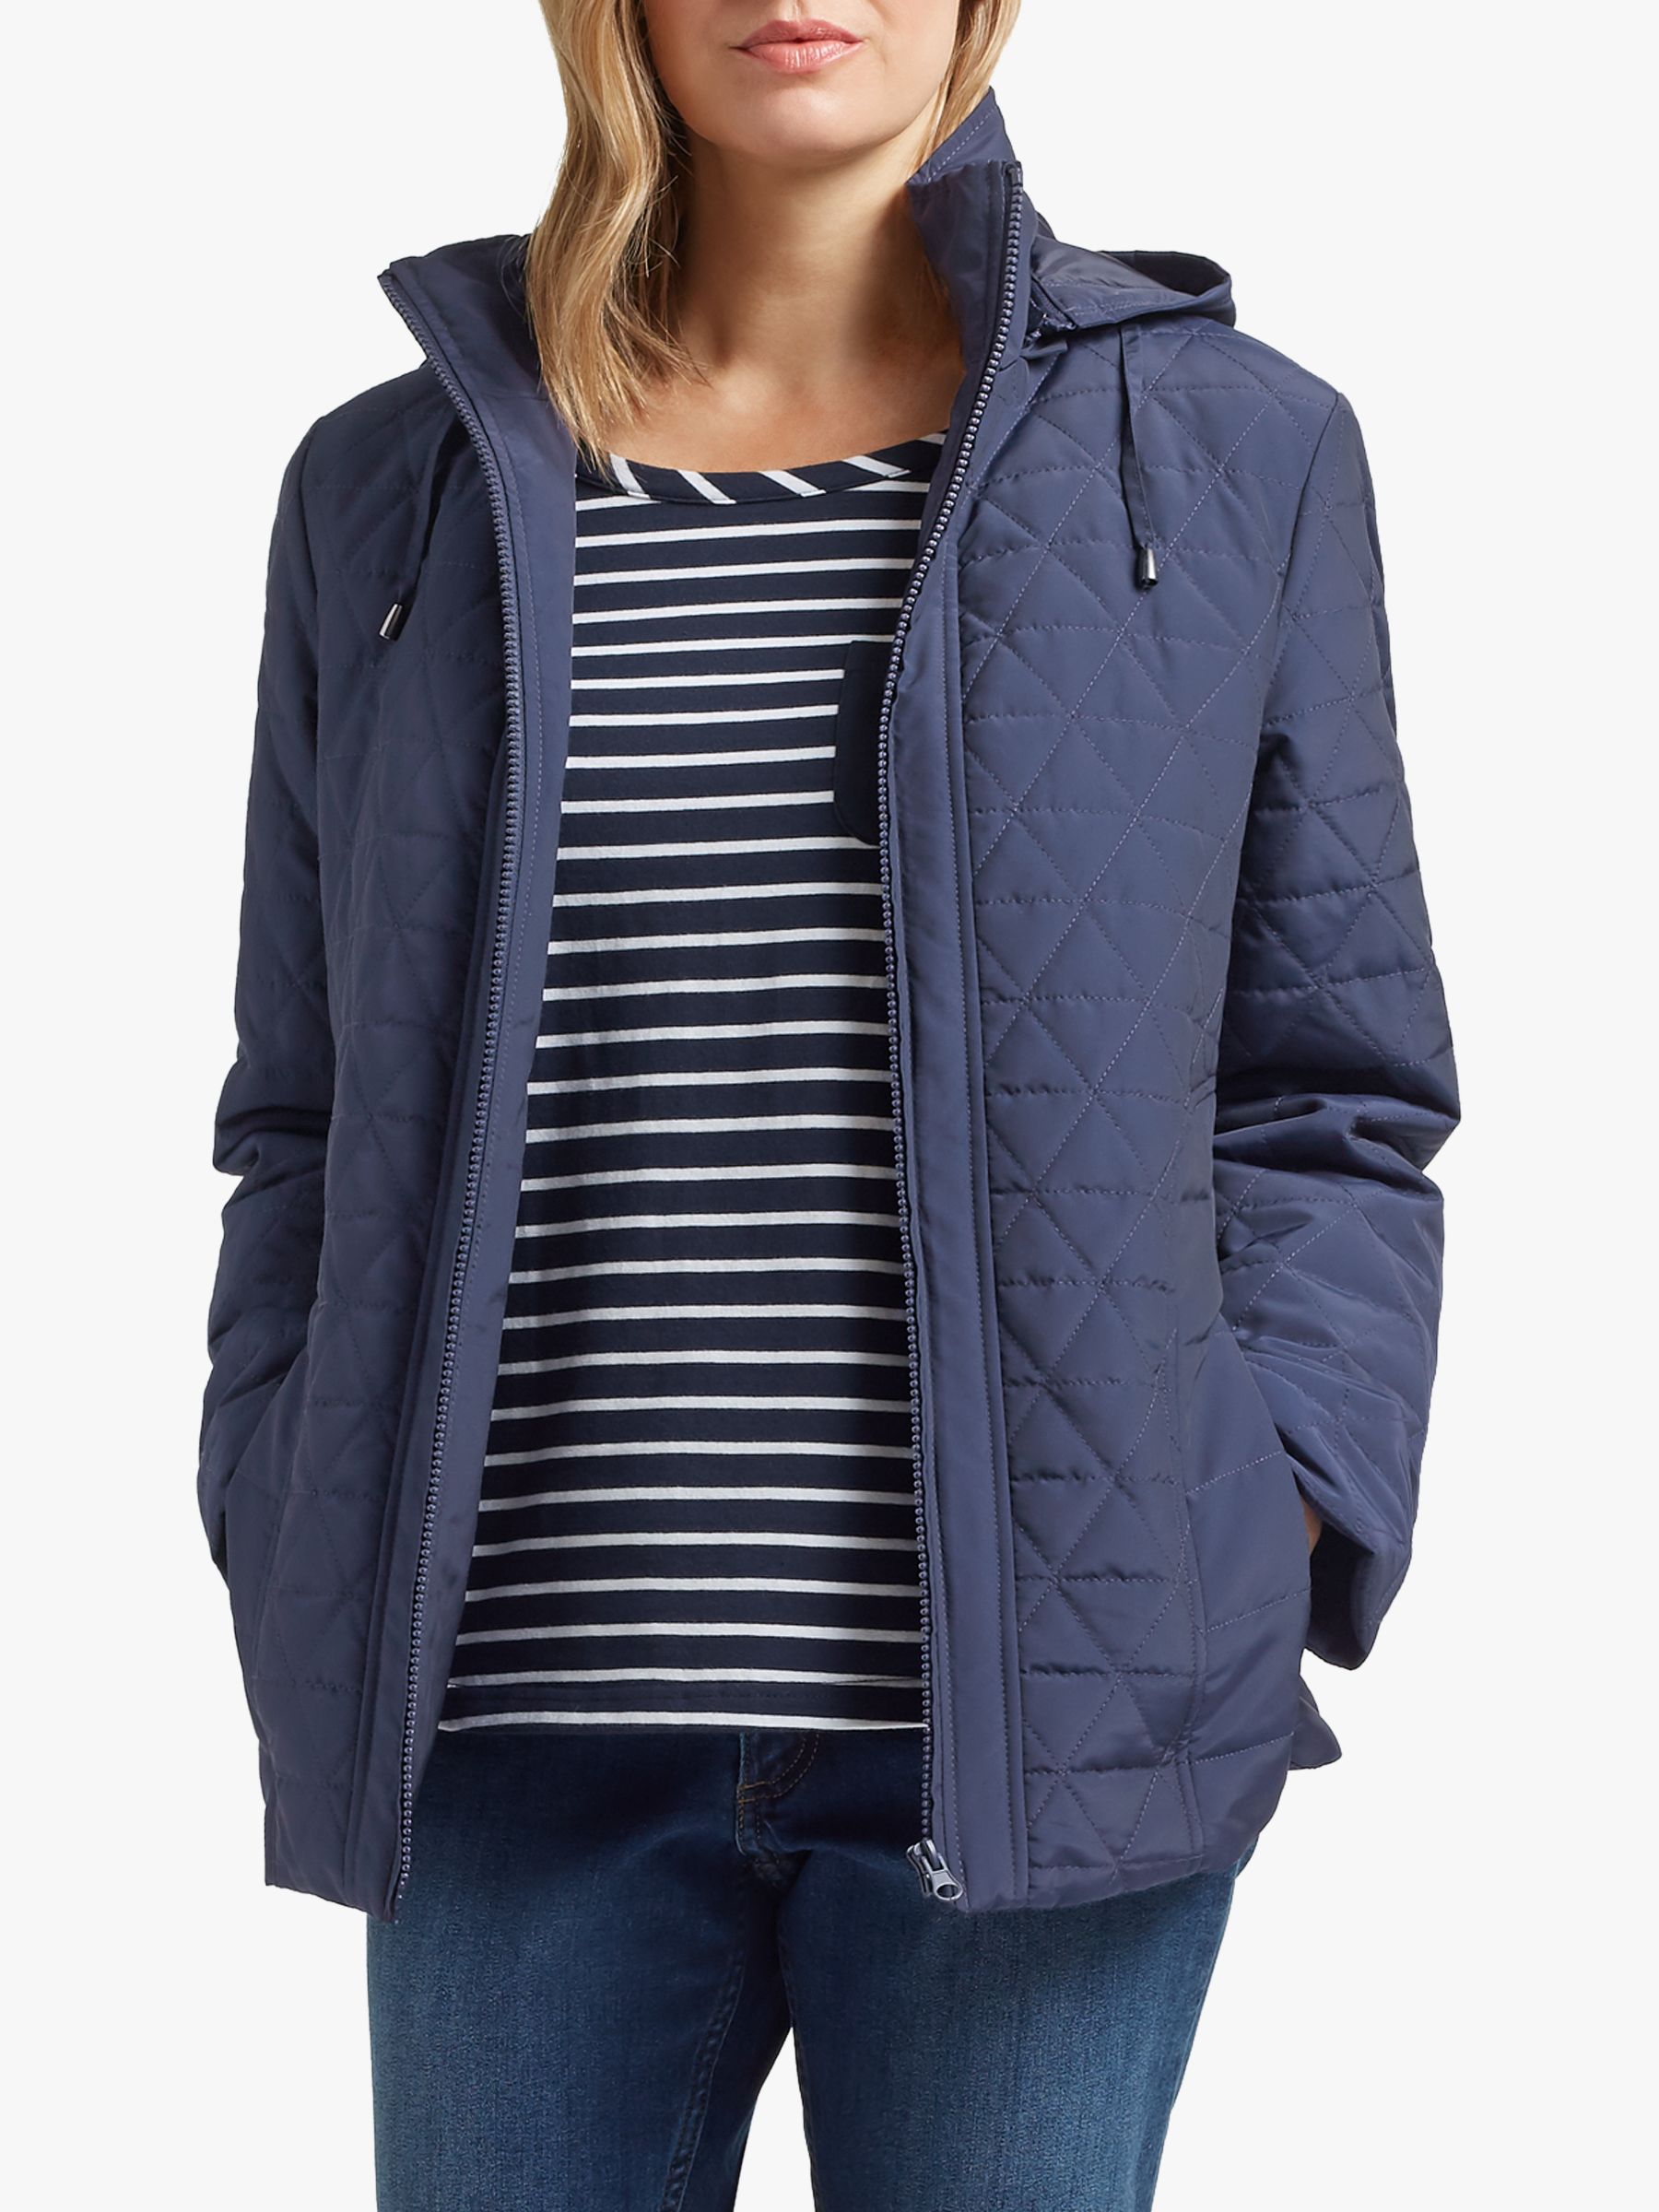 Four Seasons Quilted Jacket at John Lewis & Partners